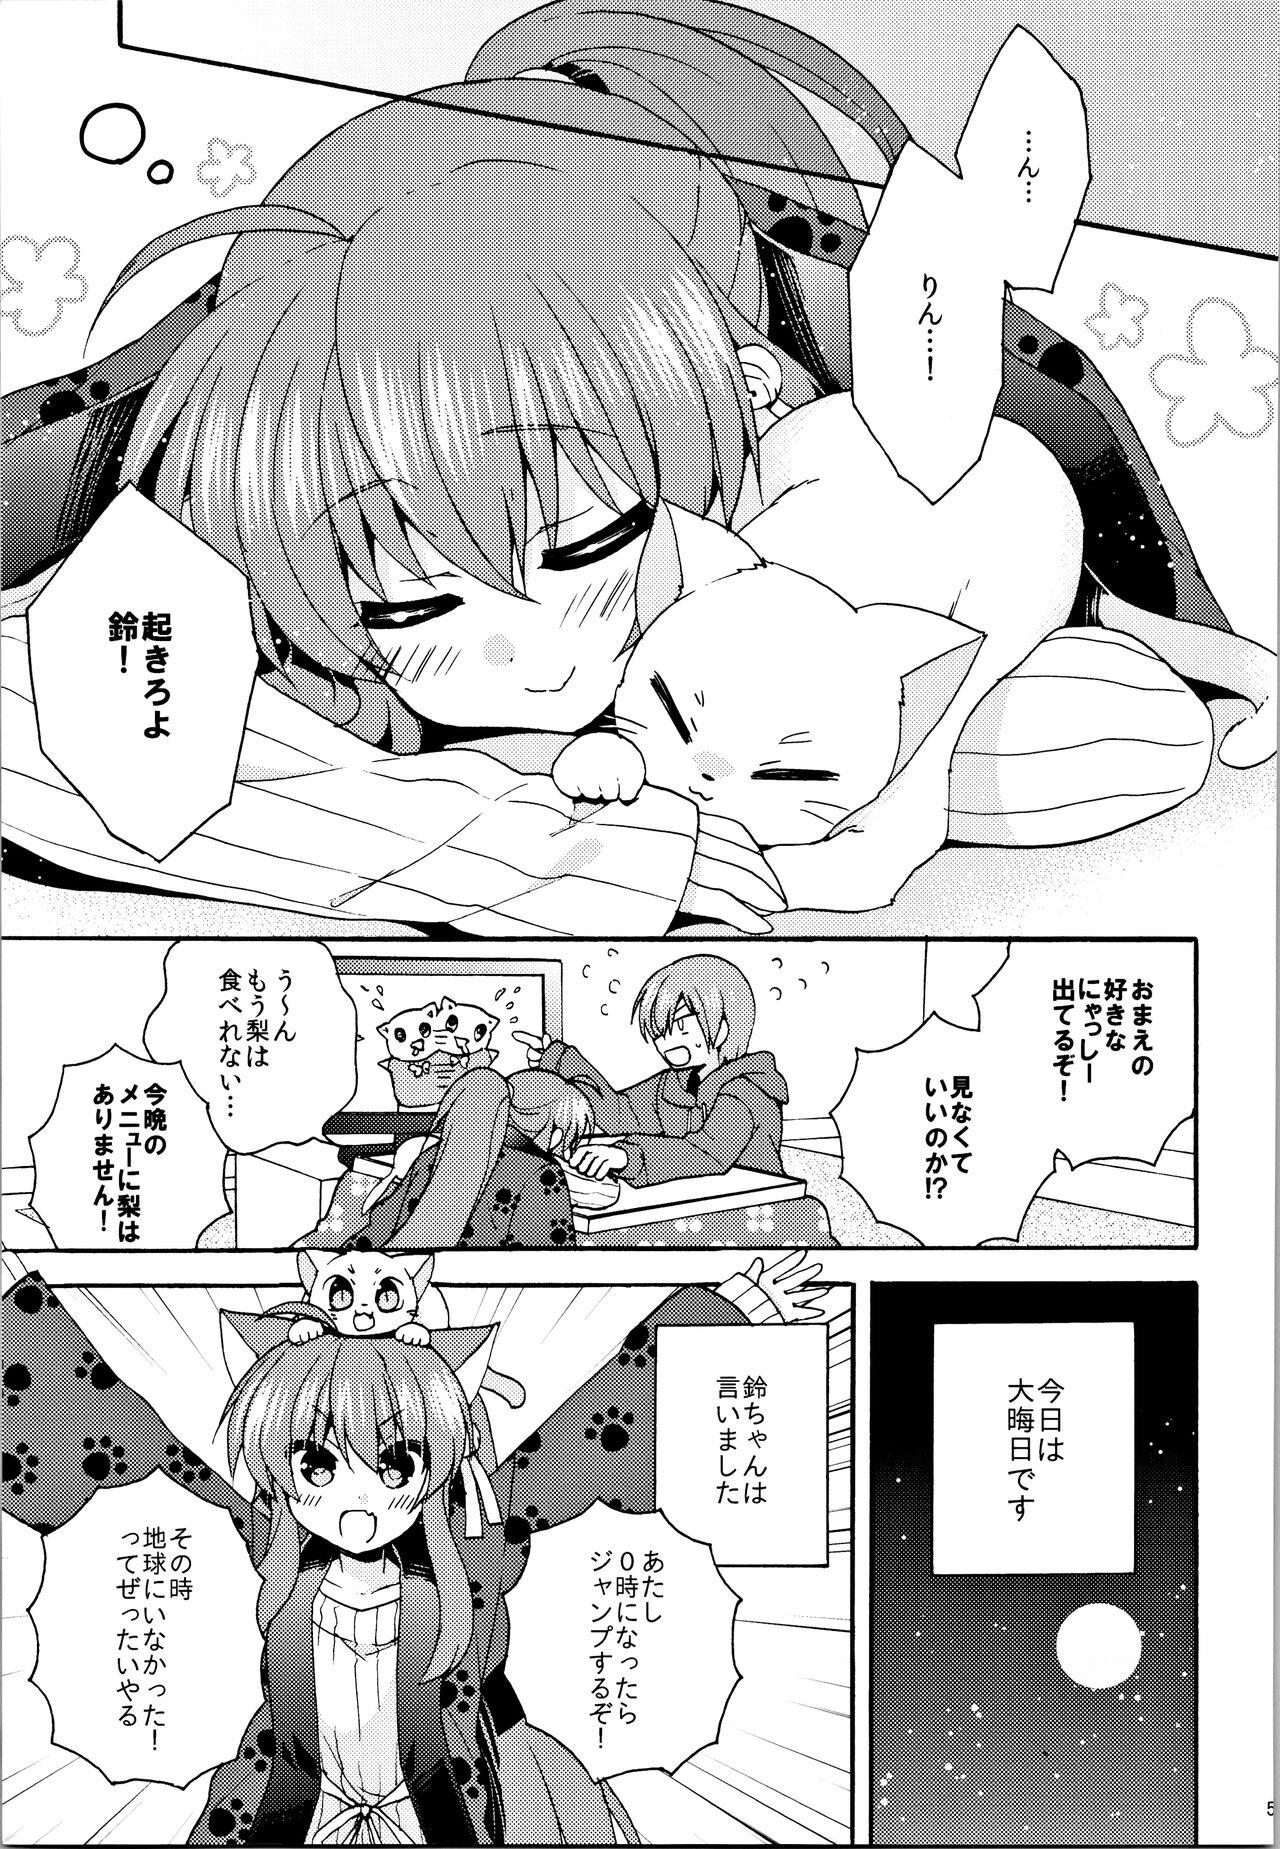 Exgirlfriend Just A Few More Nights - Little busters Amigo - Page 4